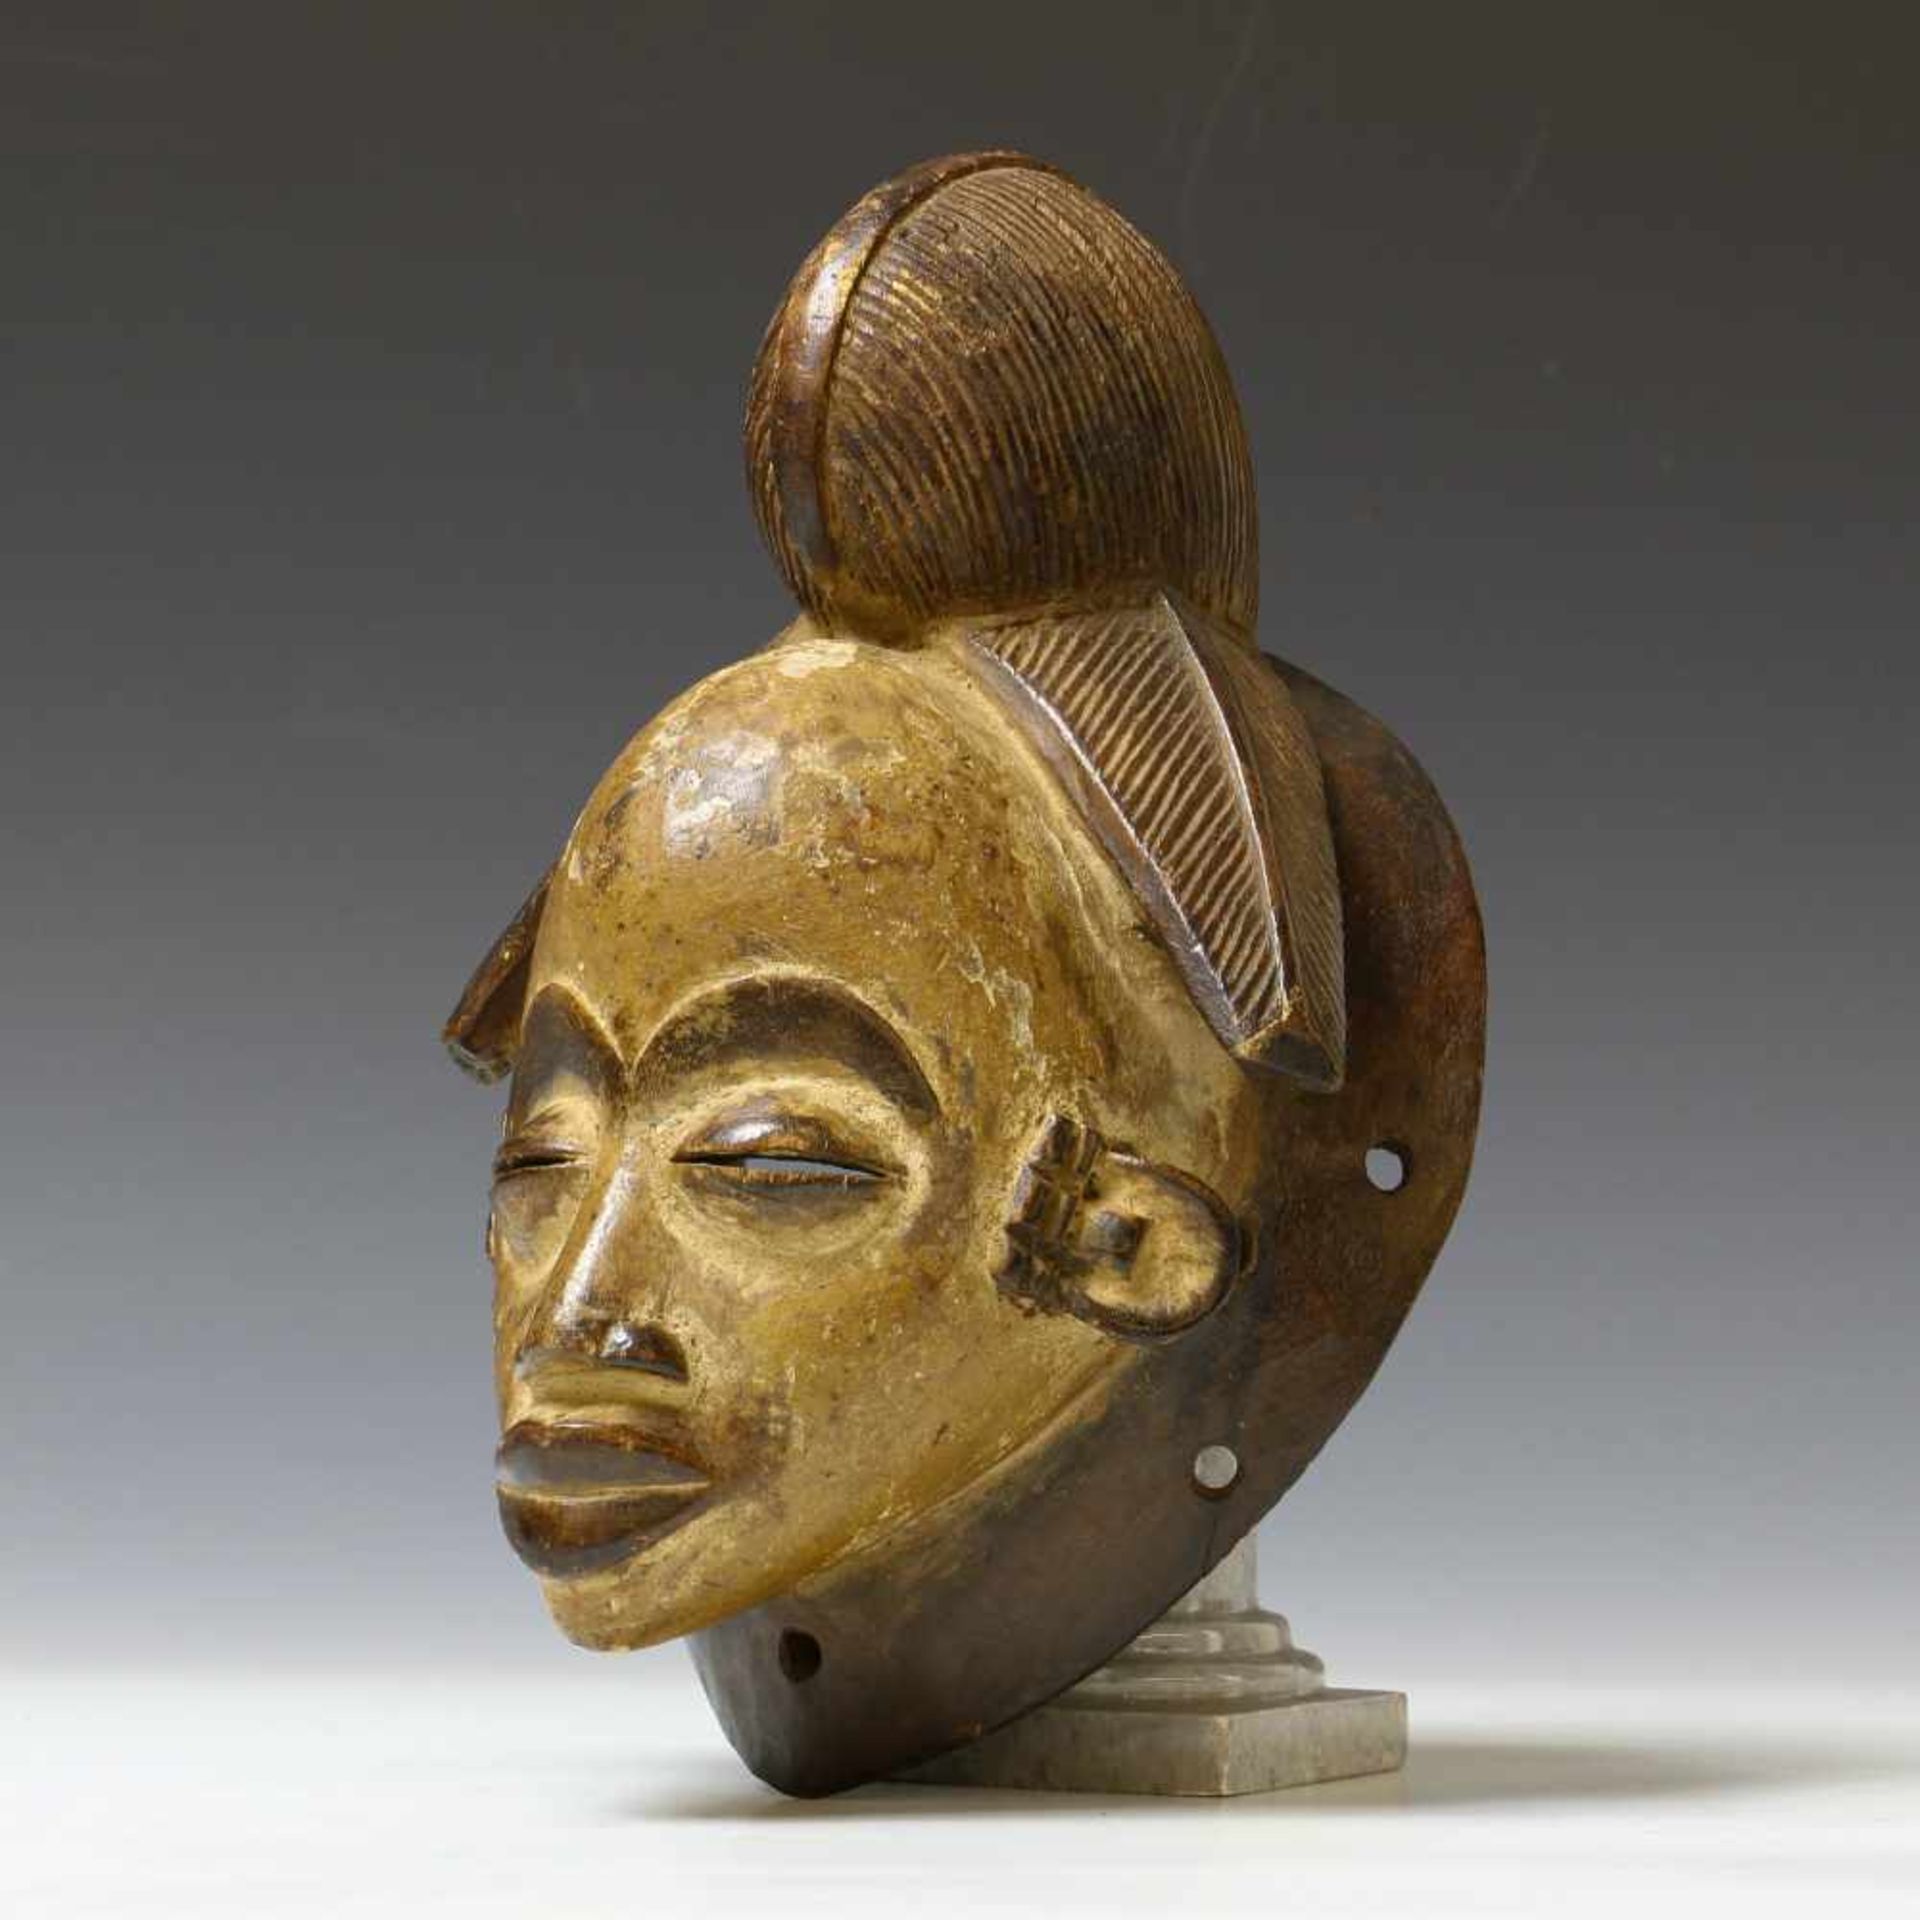 Gabon, Punu, face mask, ca. 1950with fine carved hair and brown, black and white pigments. Private